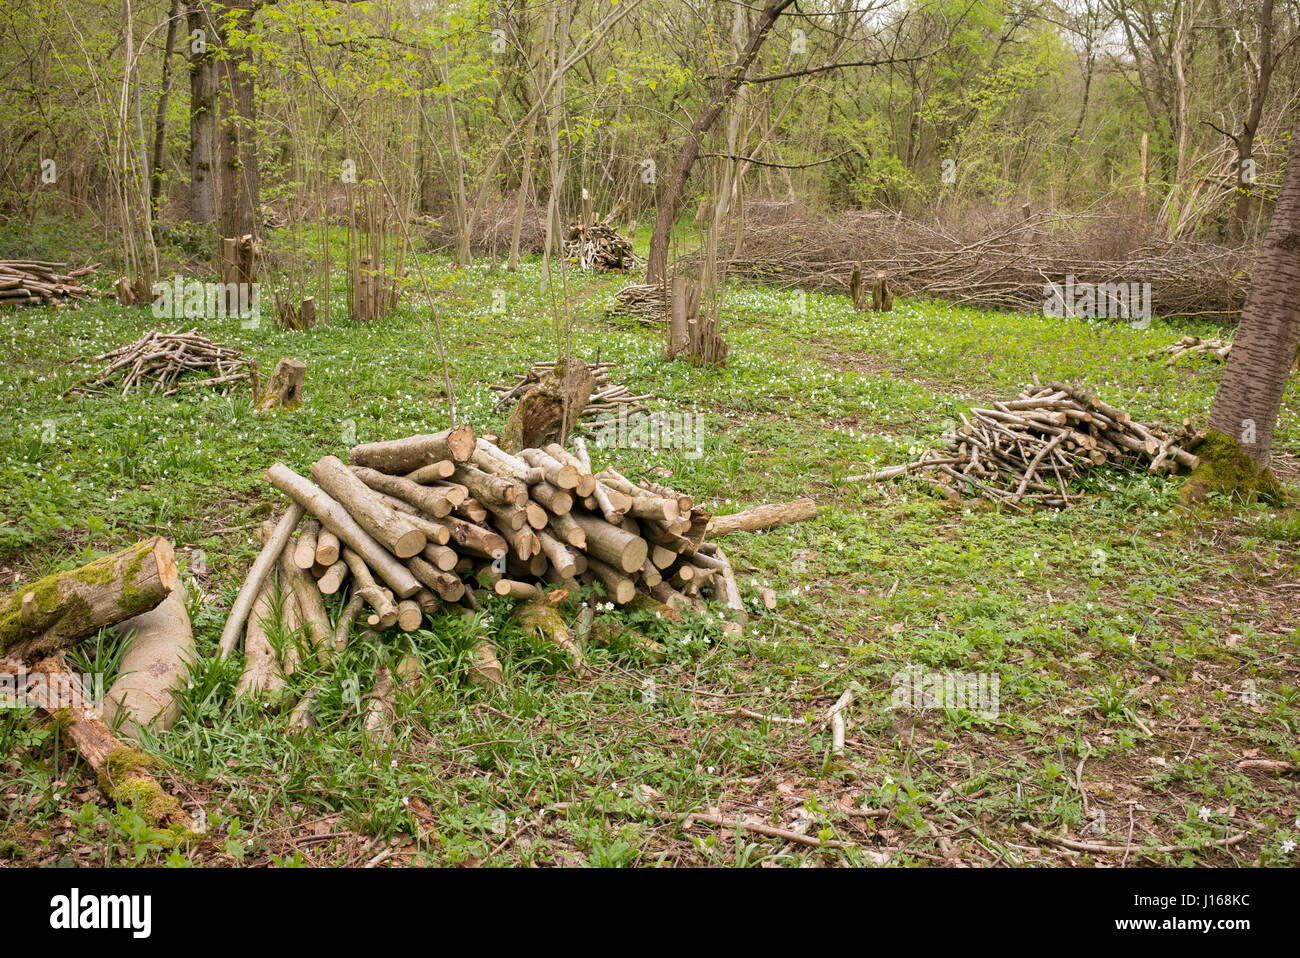 Coppiced hazel trees in an english woodland in spring. Oxfordshire, UK Stock Photo